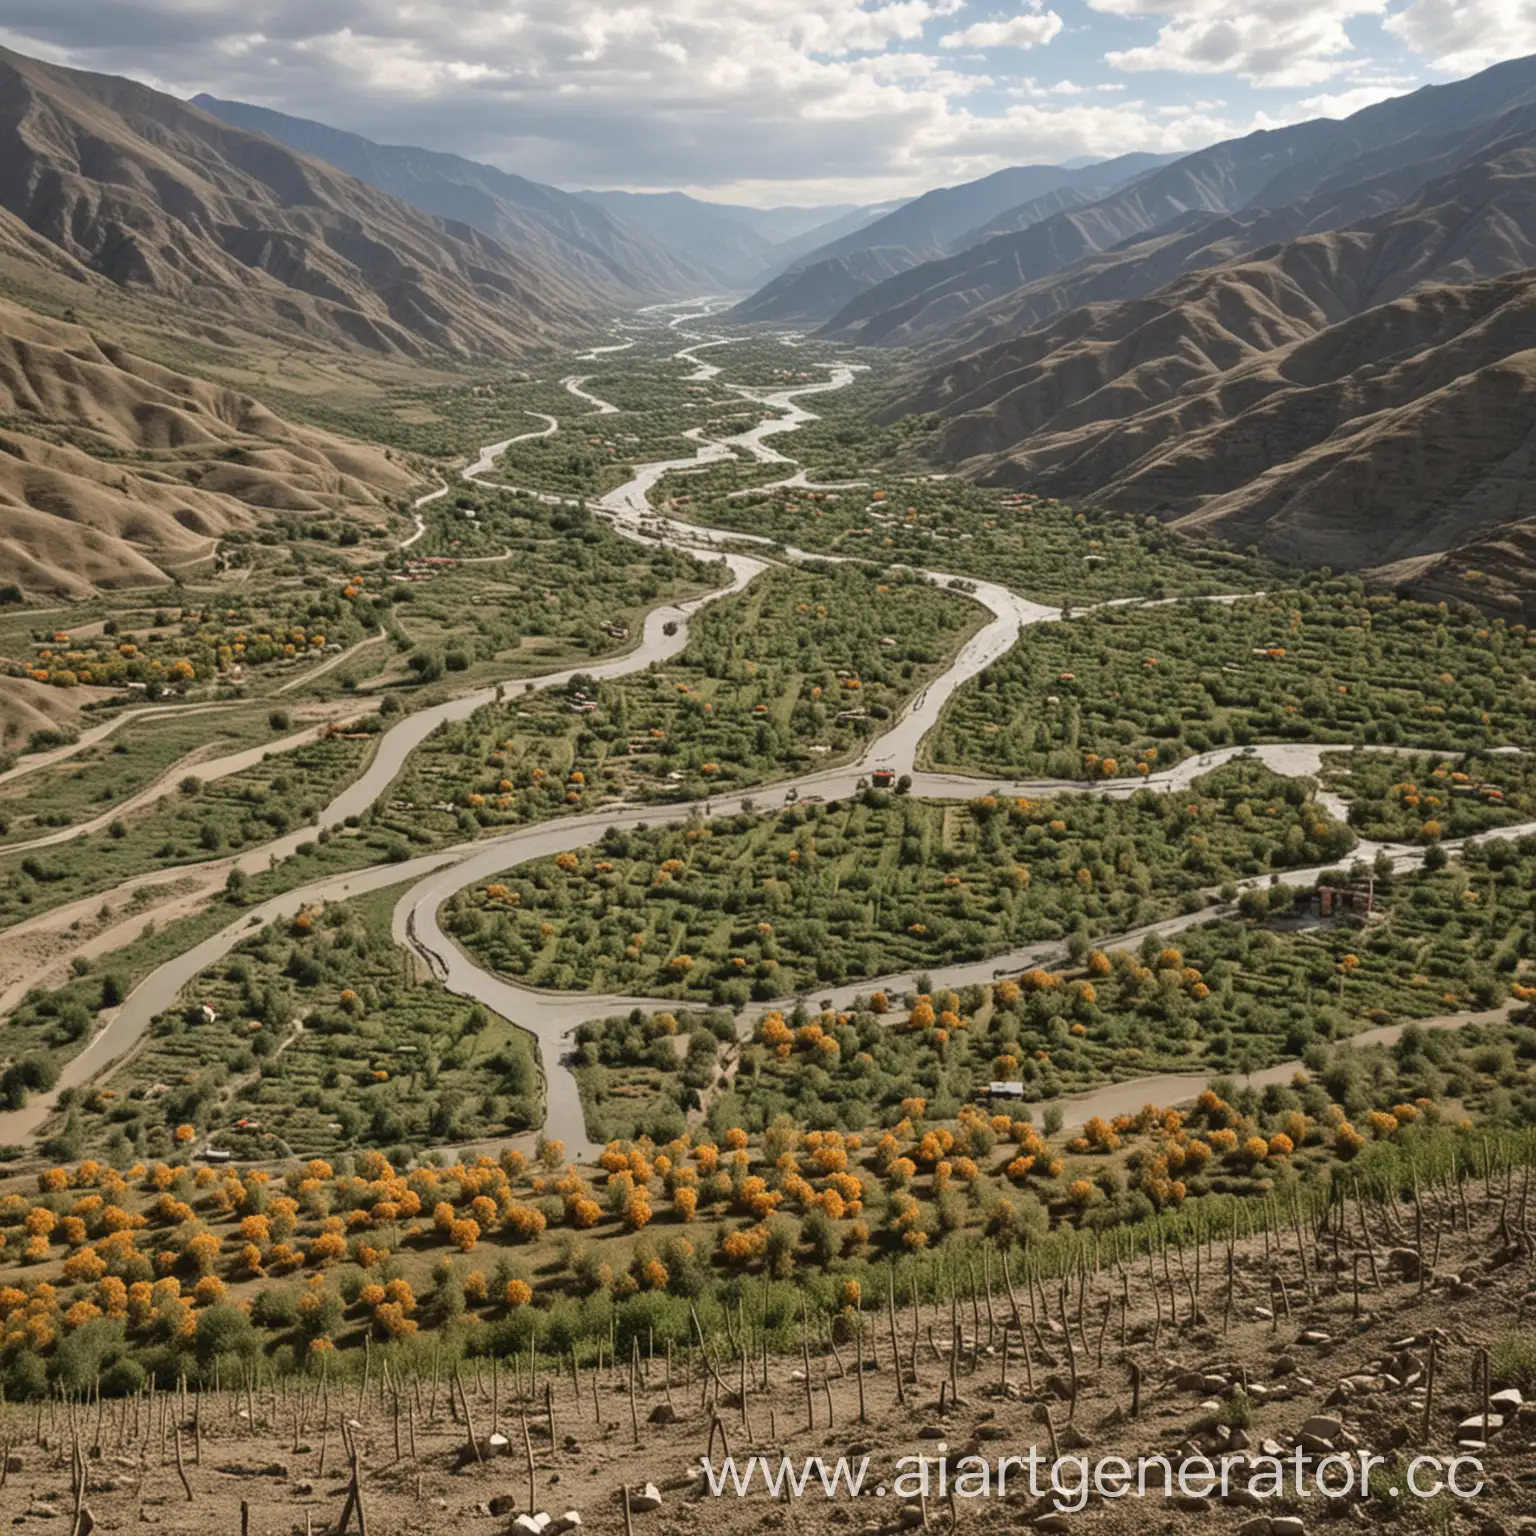 Apricot-Valley-Adaptation-Dagestan-Landscape-in-Response-to-Climate-Change